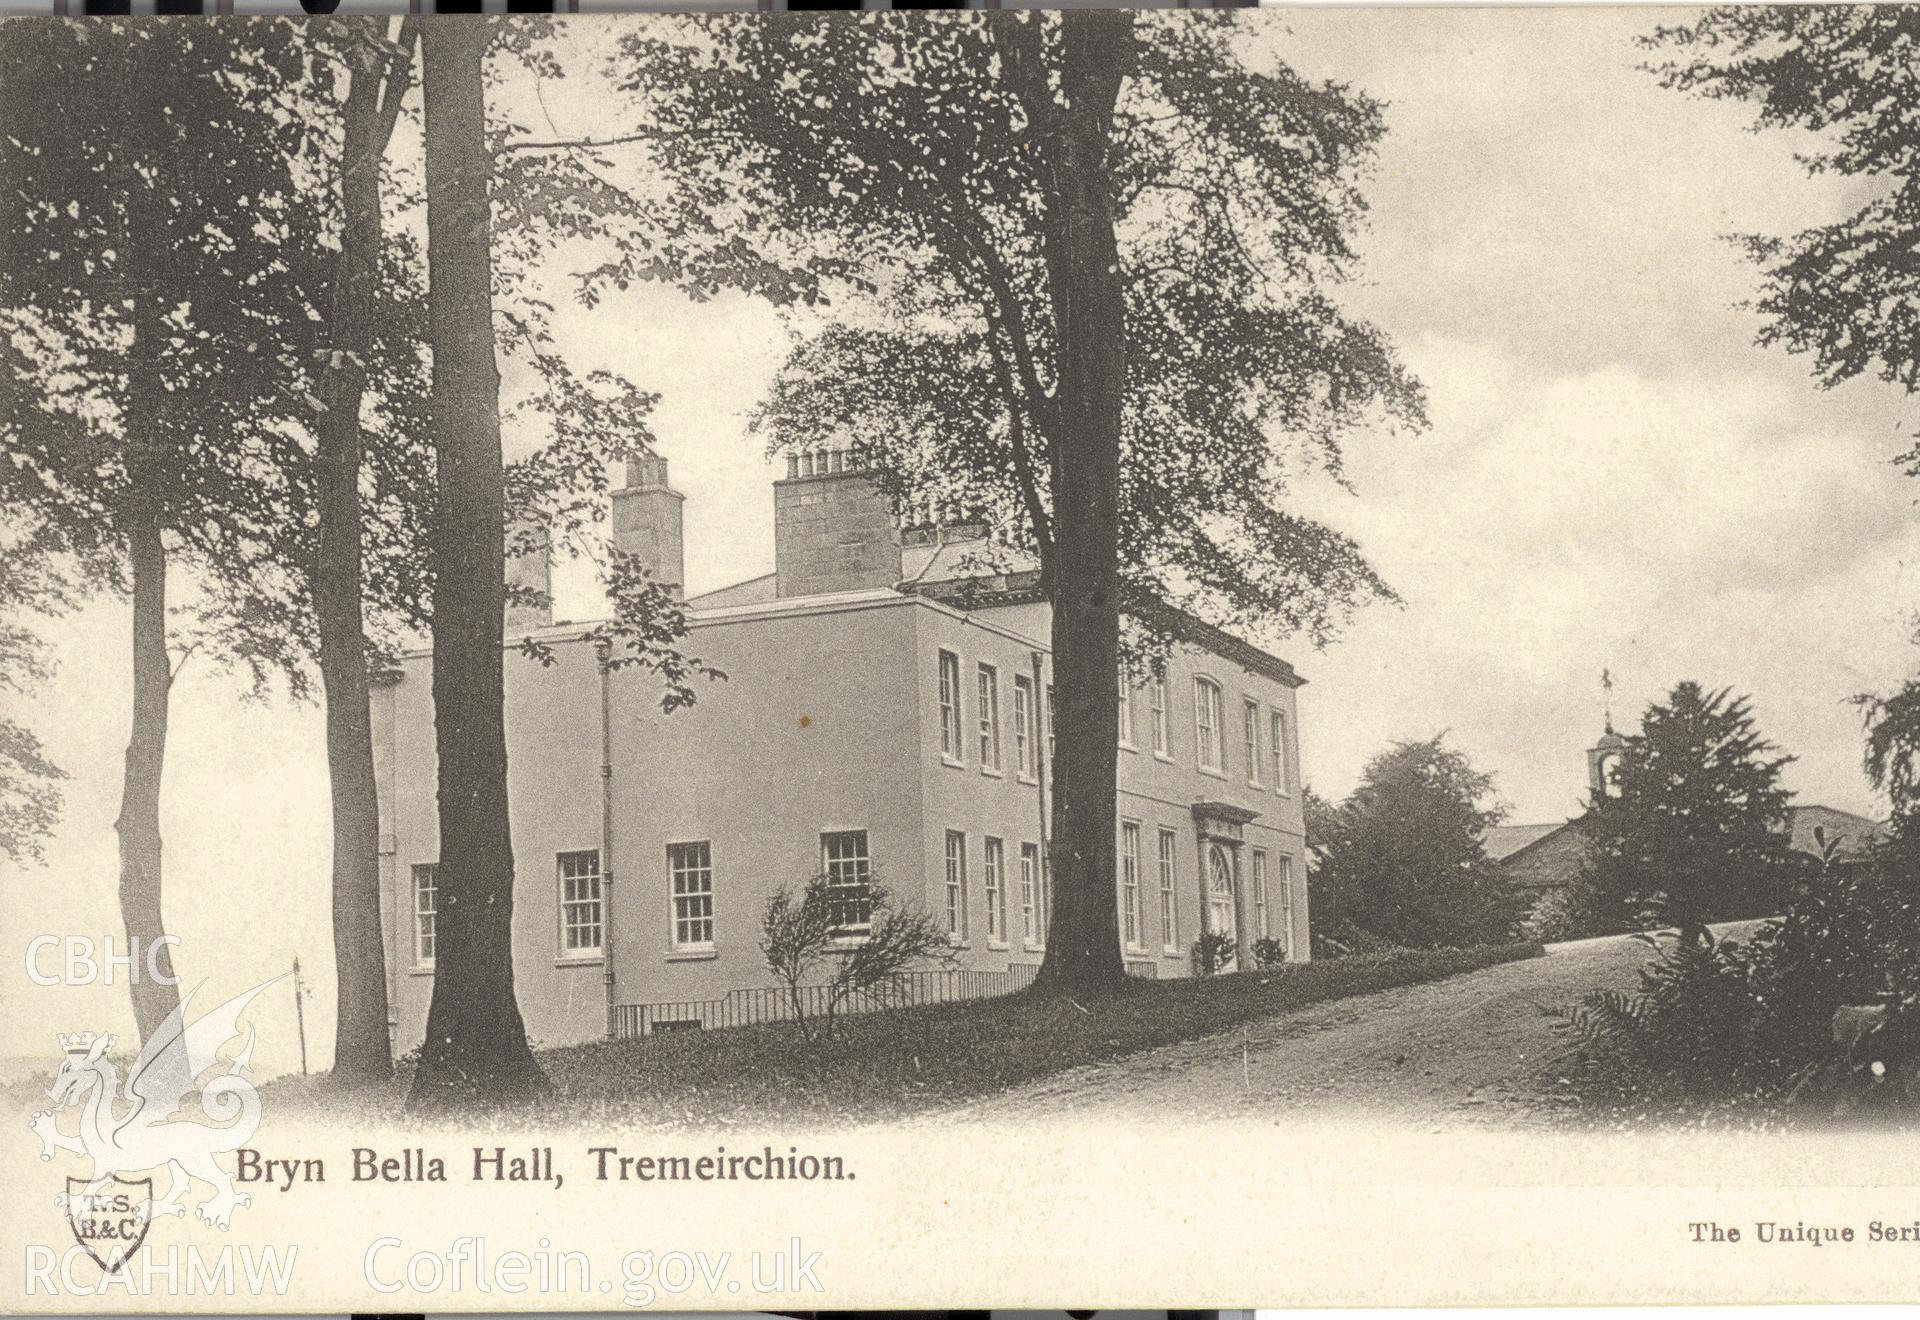 Digitised postcard image of east front, Brynbella, T.S.B.& C. The Unique series. Produced by Parks and Gardens Data Services, from an original item in the Peter Davis Collection at Parks and Gardens UK. We hold only web-resolution images of this collection, suitable for viewing on screen and for research purposes only. We do not hold the original images, or publication quality scans.